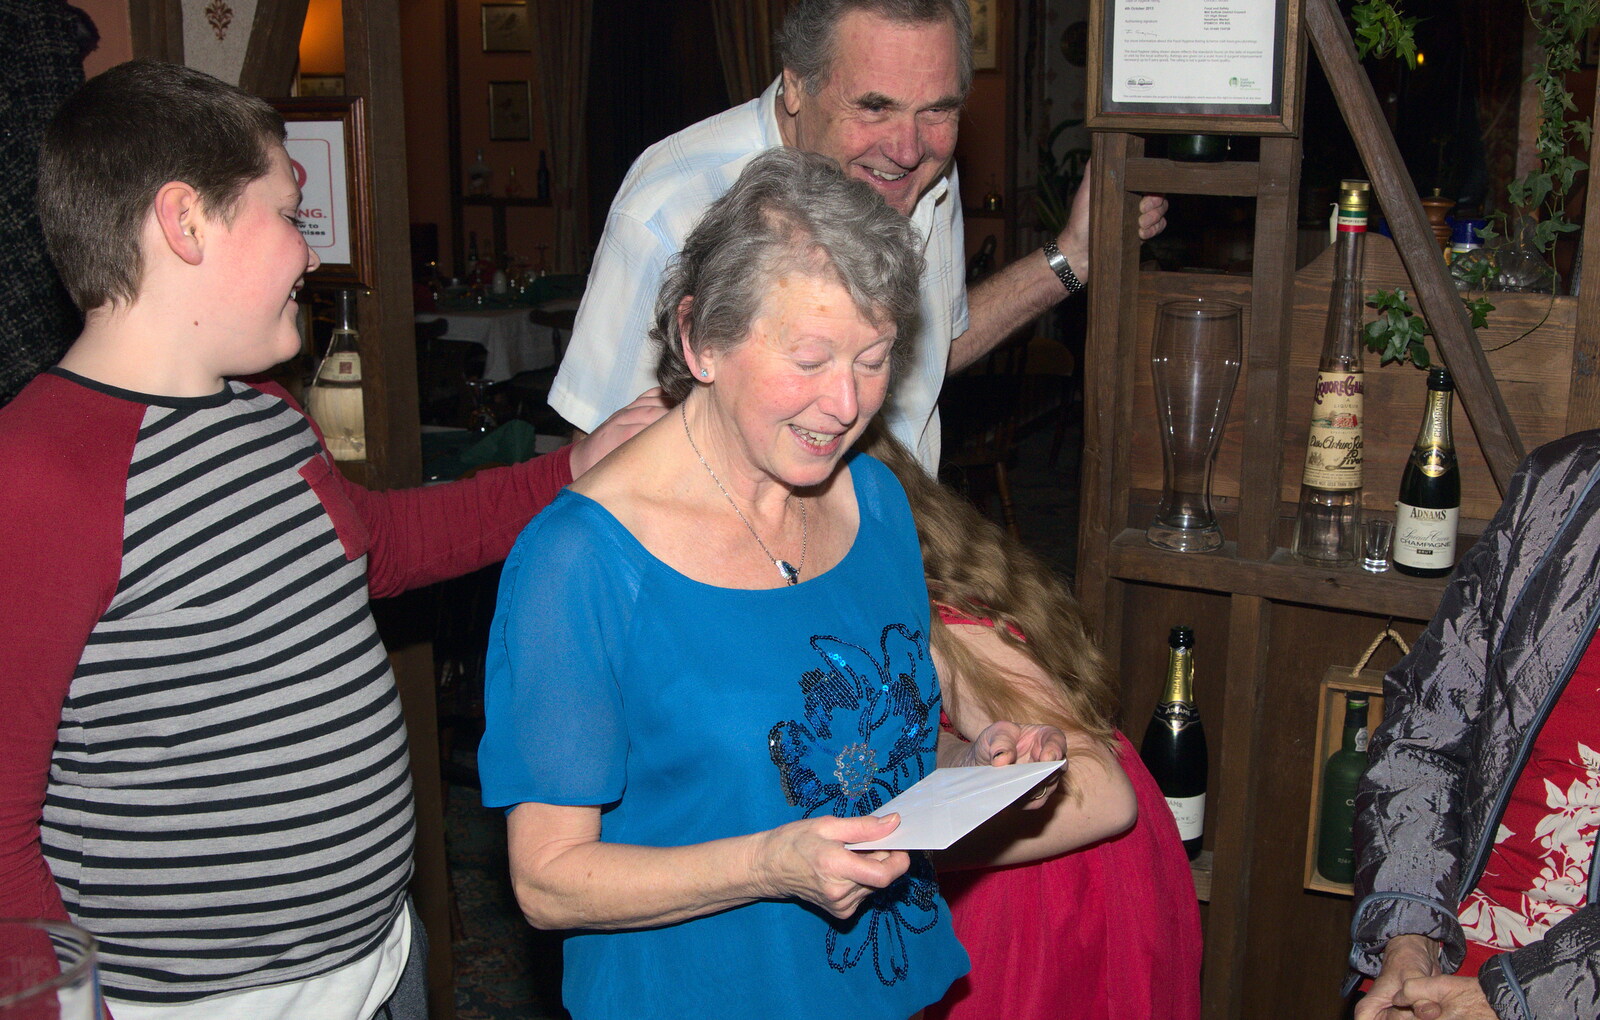 Sylvia gets a present from the bike club from Sylvia's 70th Birthday up the Swan Inn, Brome, Suffolk - 11th February 2017